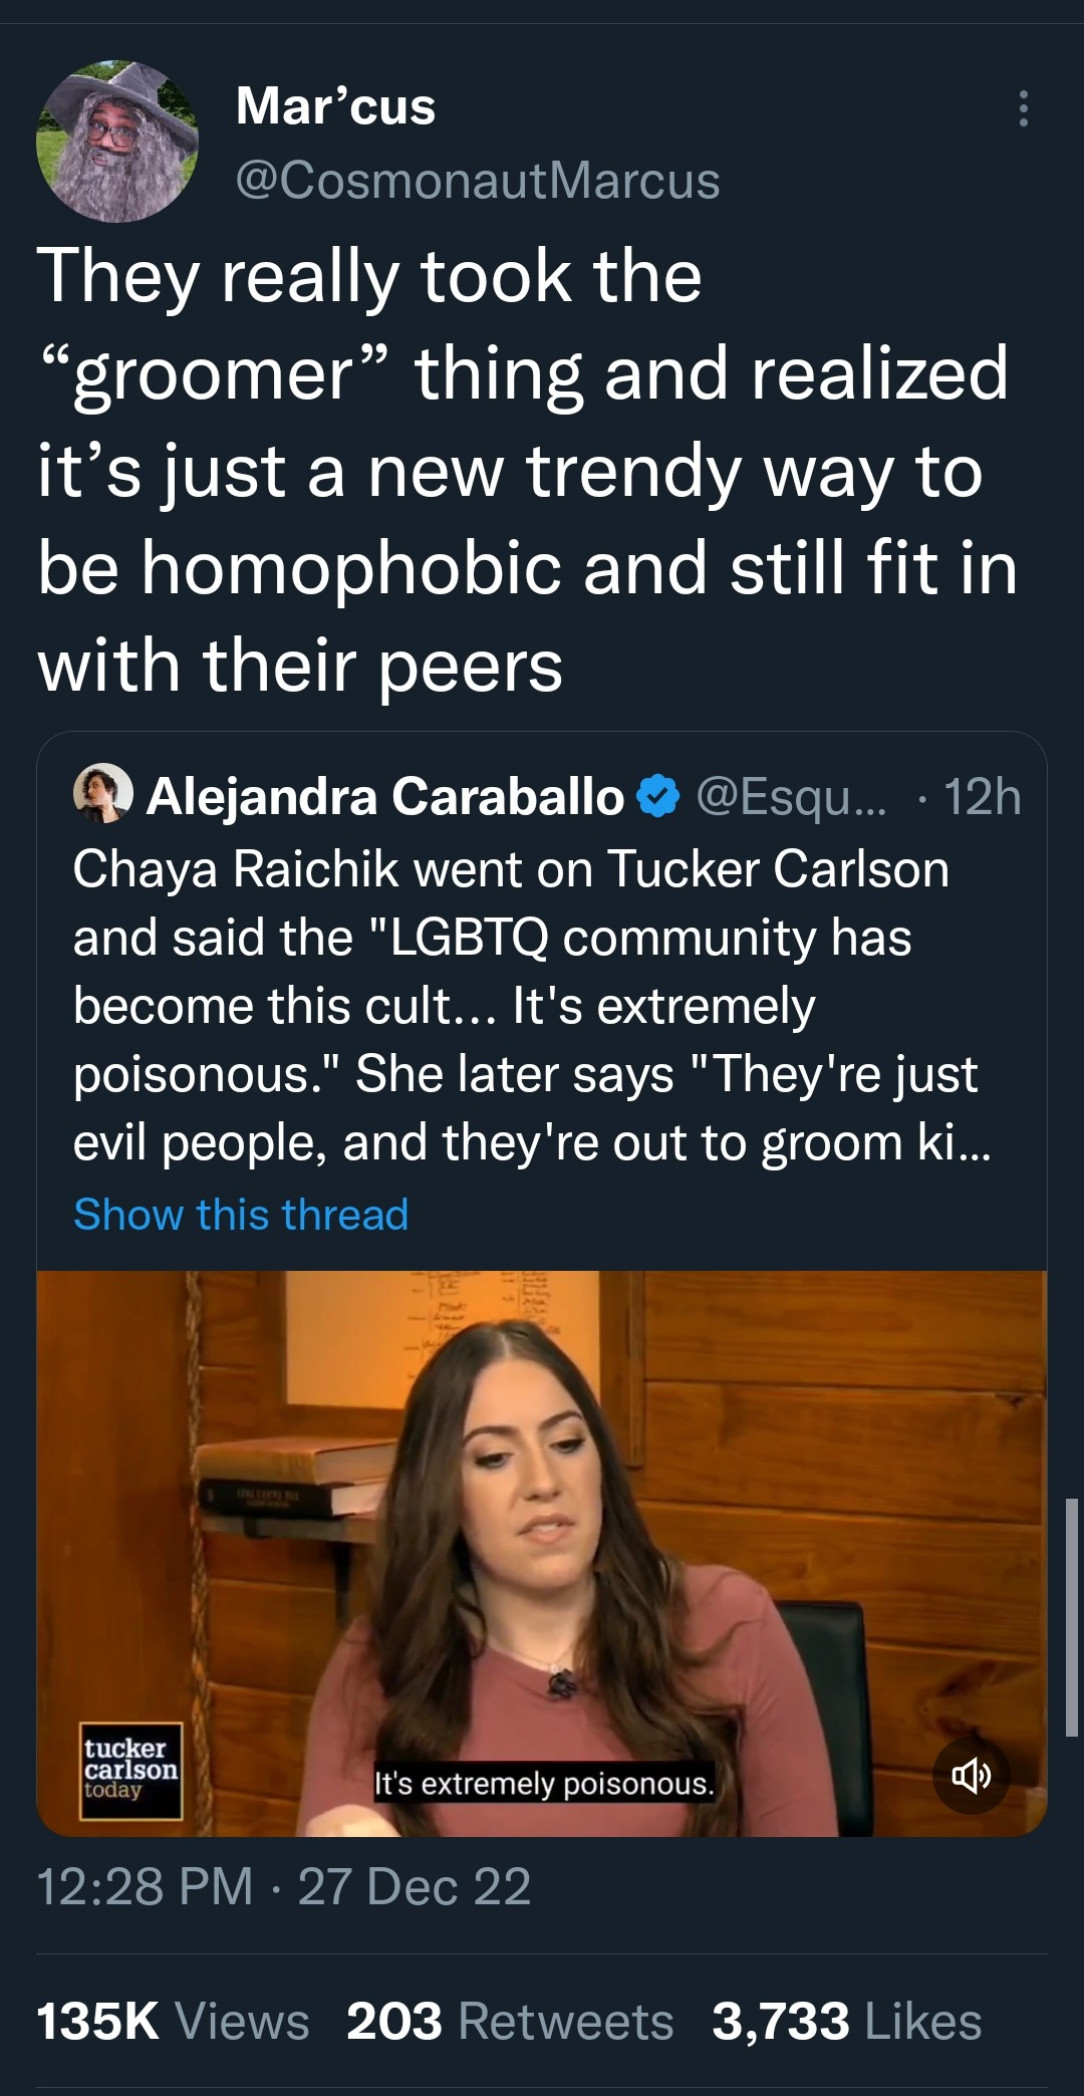 They think the G in LGBTQ stands for &quot;Groomed&quot;